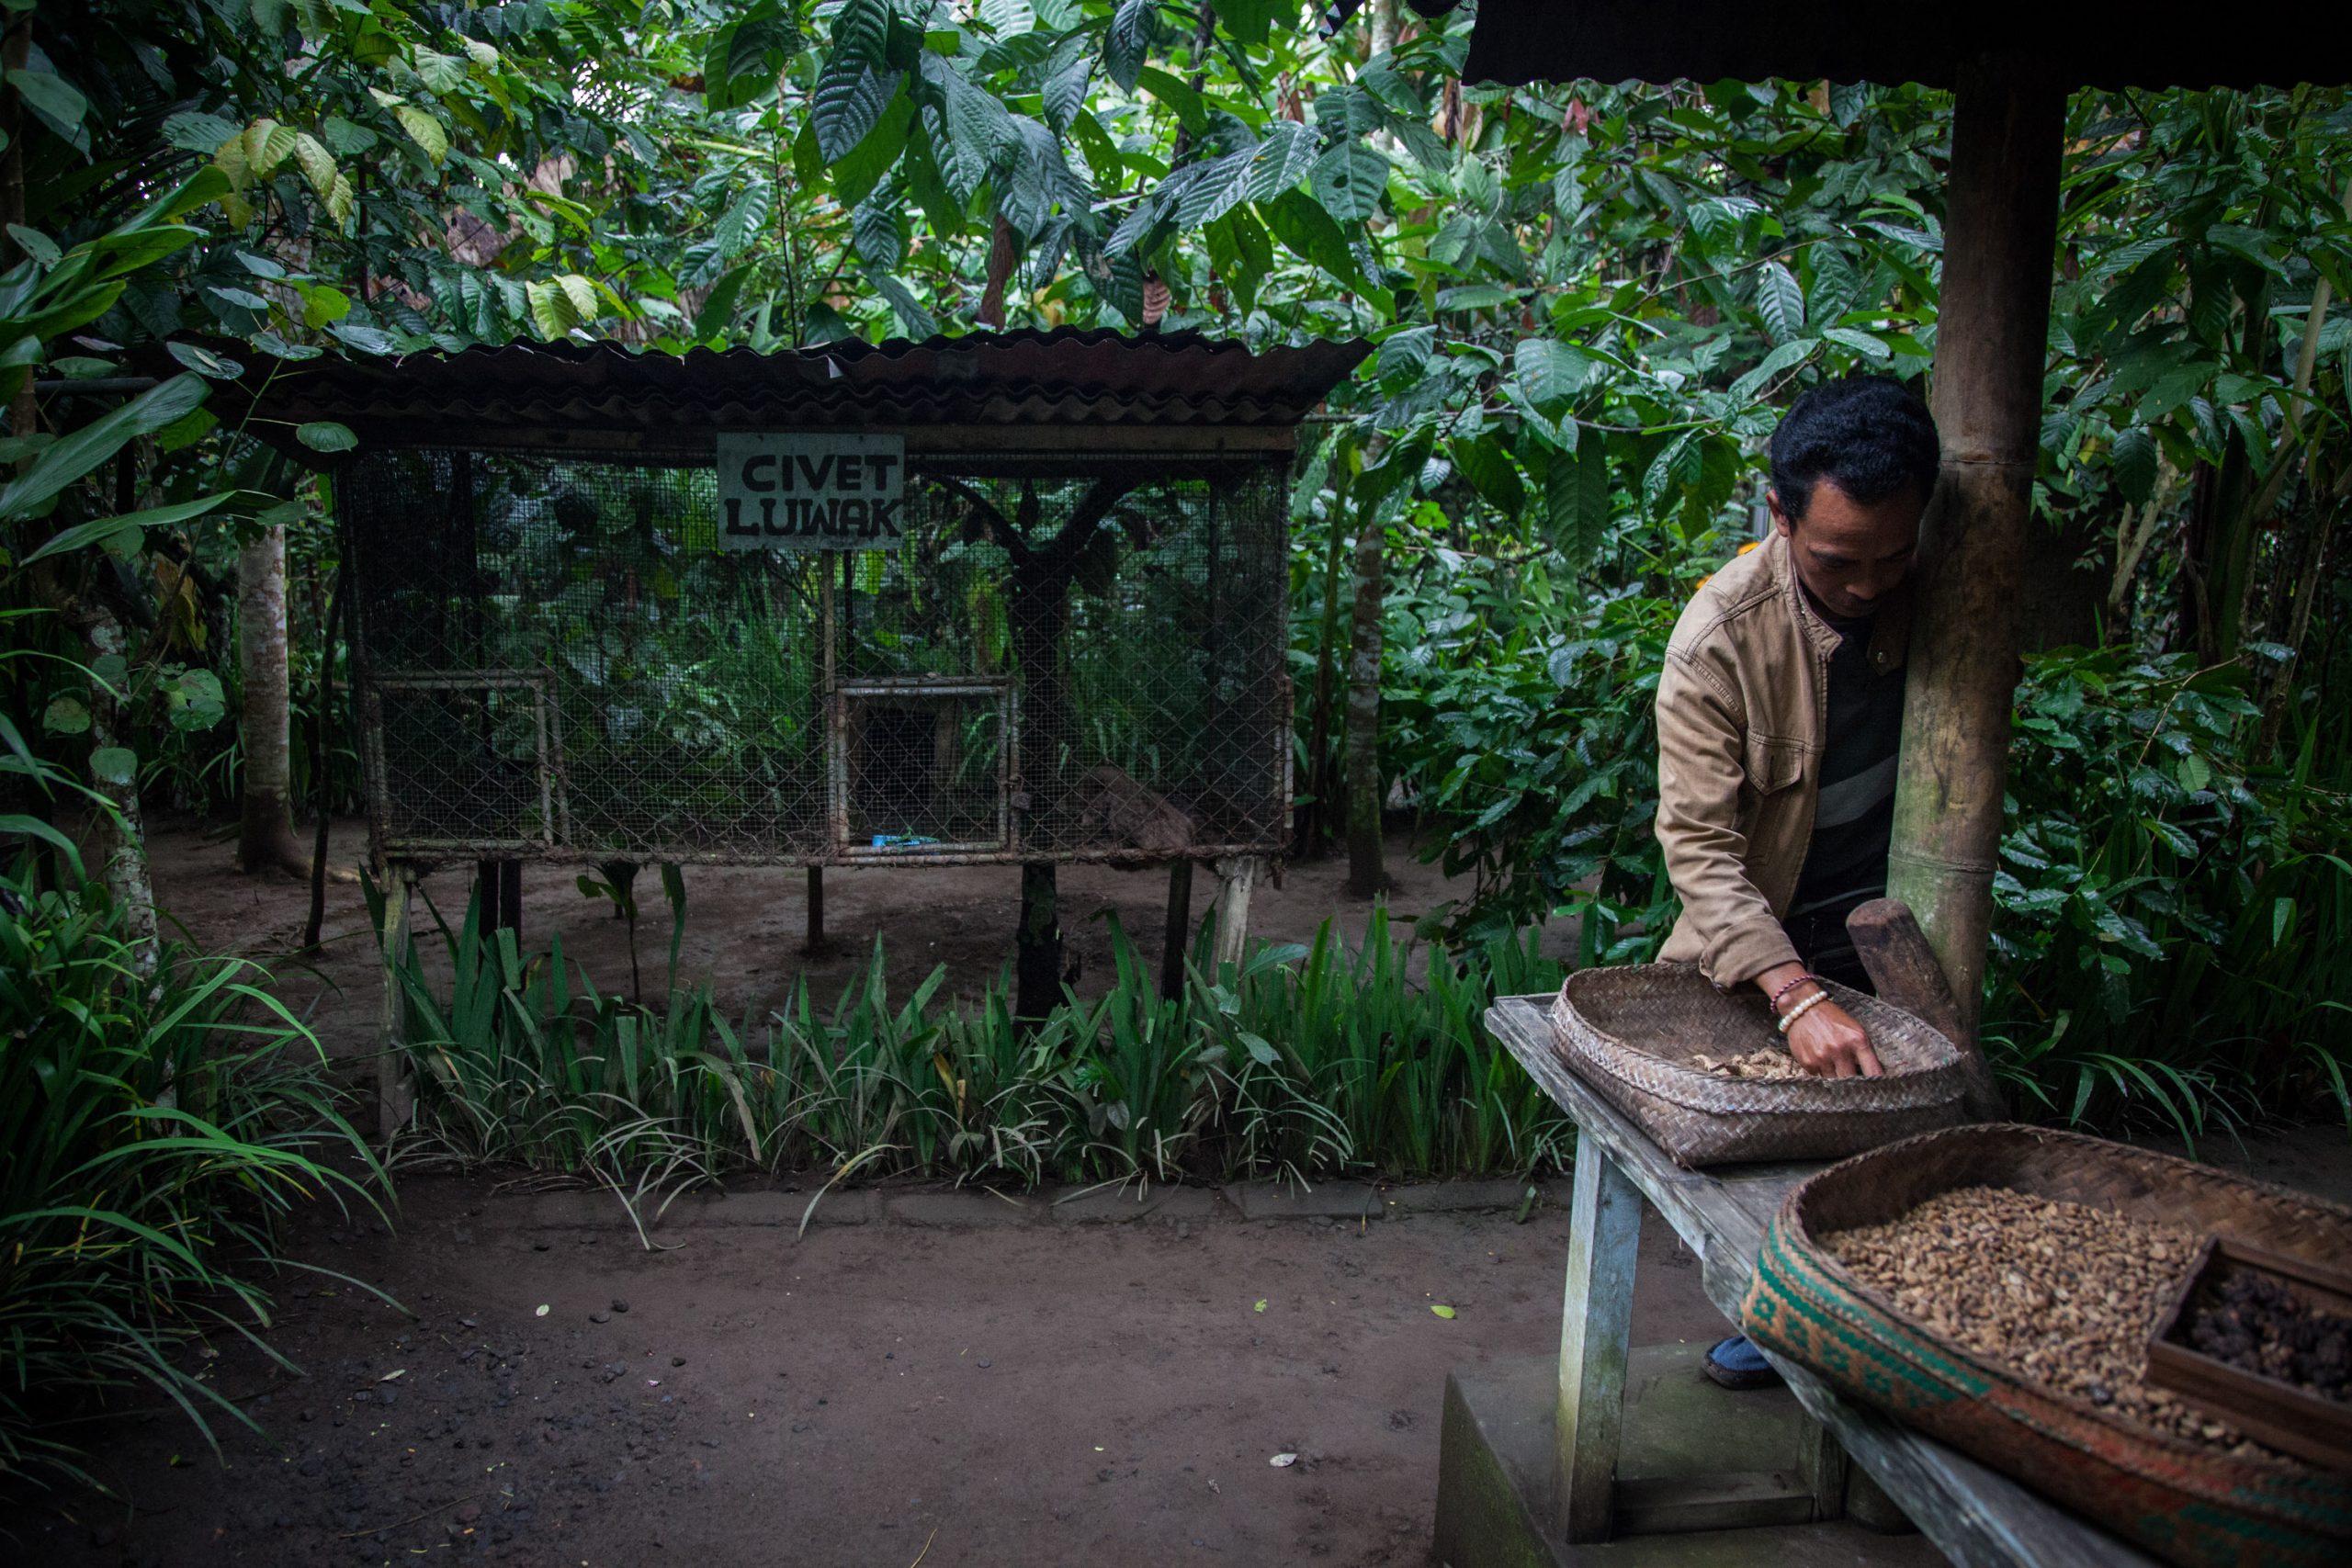 El Nino Threatens Coffee Crop, Prices Trading Near Record Highs